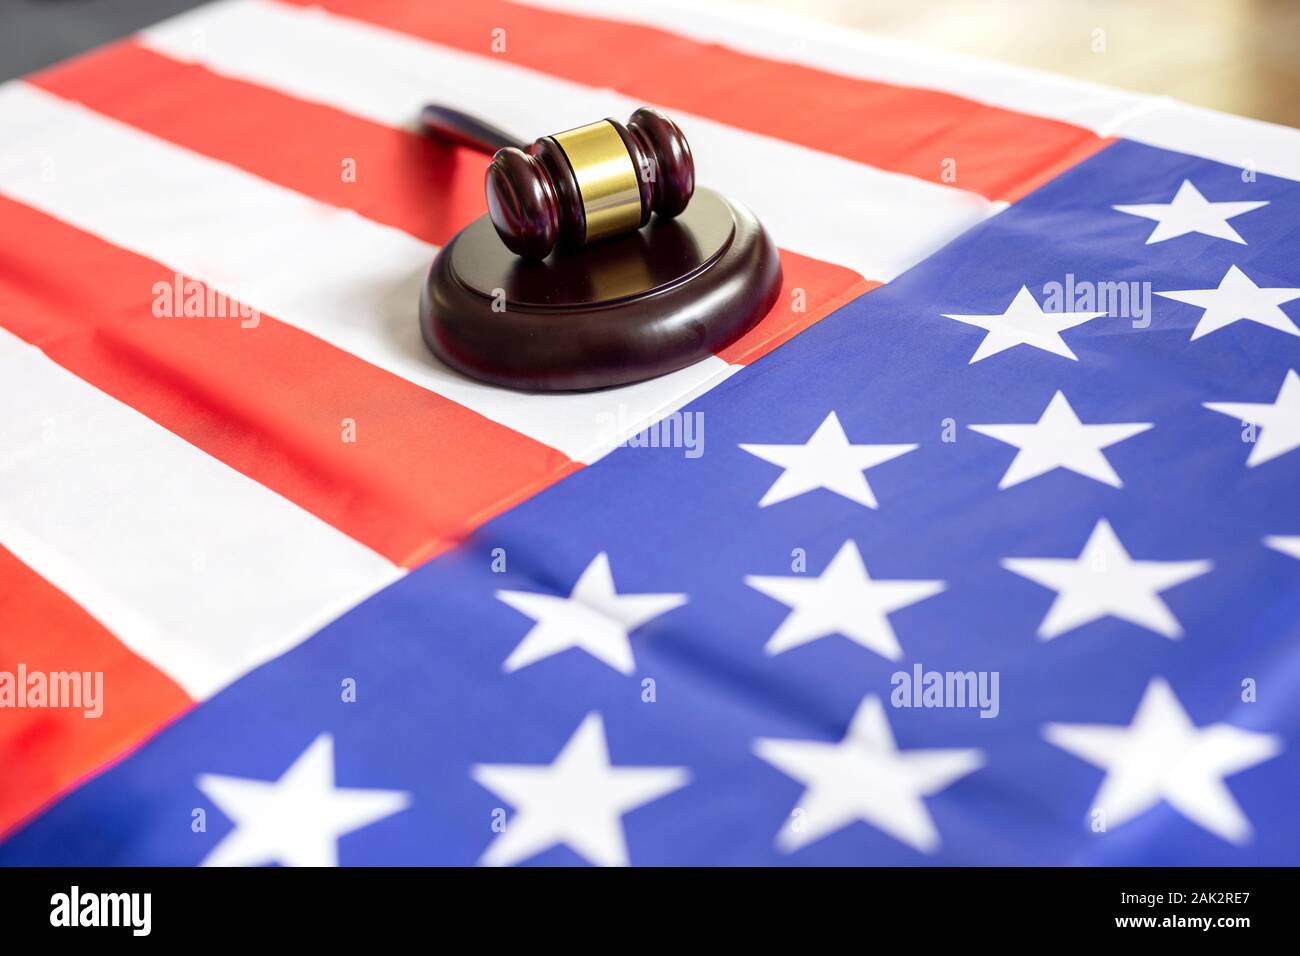 United states flag with wooden gavel on table Stock Photo